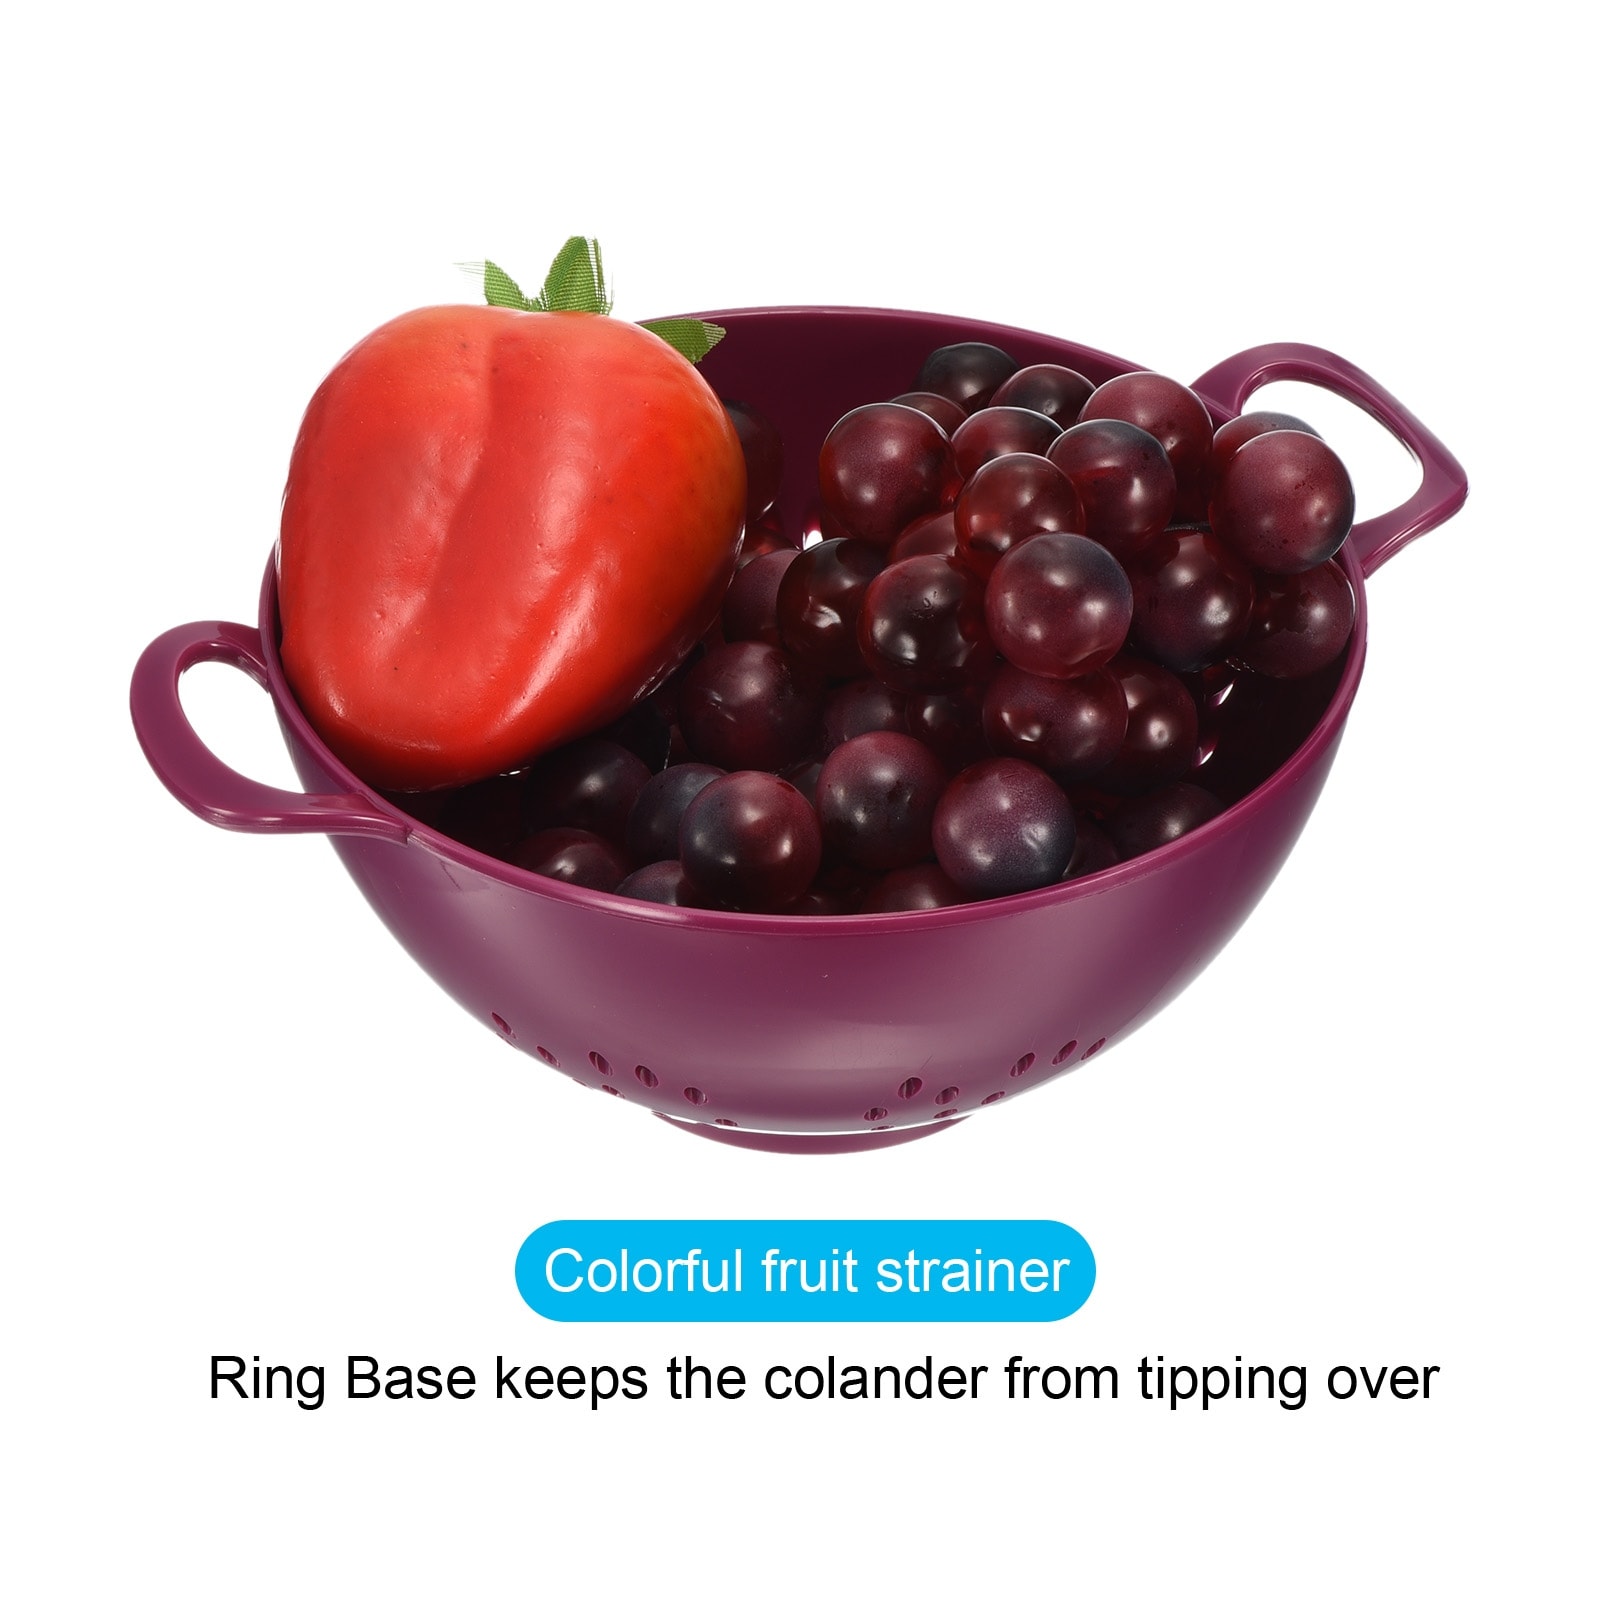 https://ak1.ostkcdn.com/images/products/is/images/direct/987269f16a8ce4b83bcdc85b1fee51d4ca21061e/Rice-Sieve-Washing-Colander-Strainer-Drainer-Fruit-Cleaning-Bowl-Purple.jpg